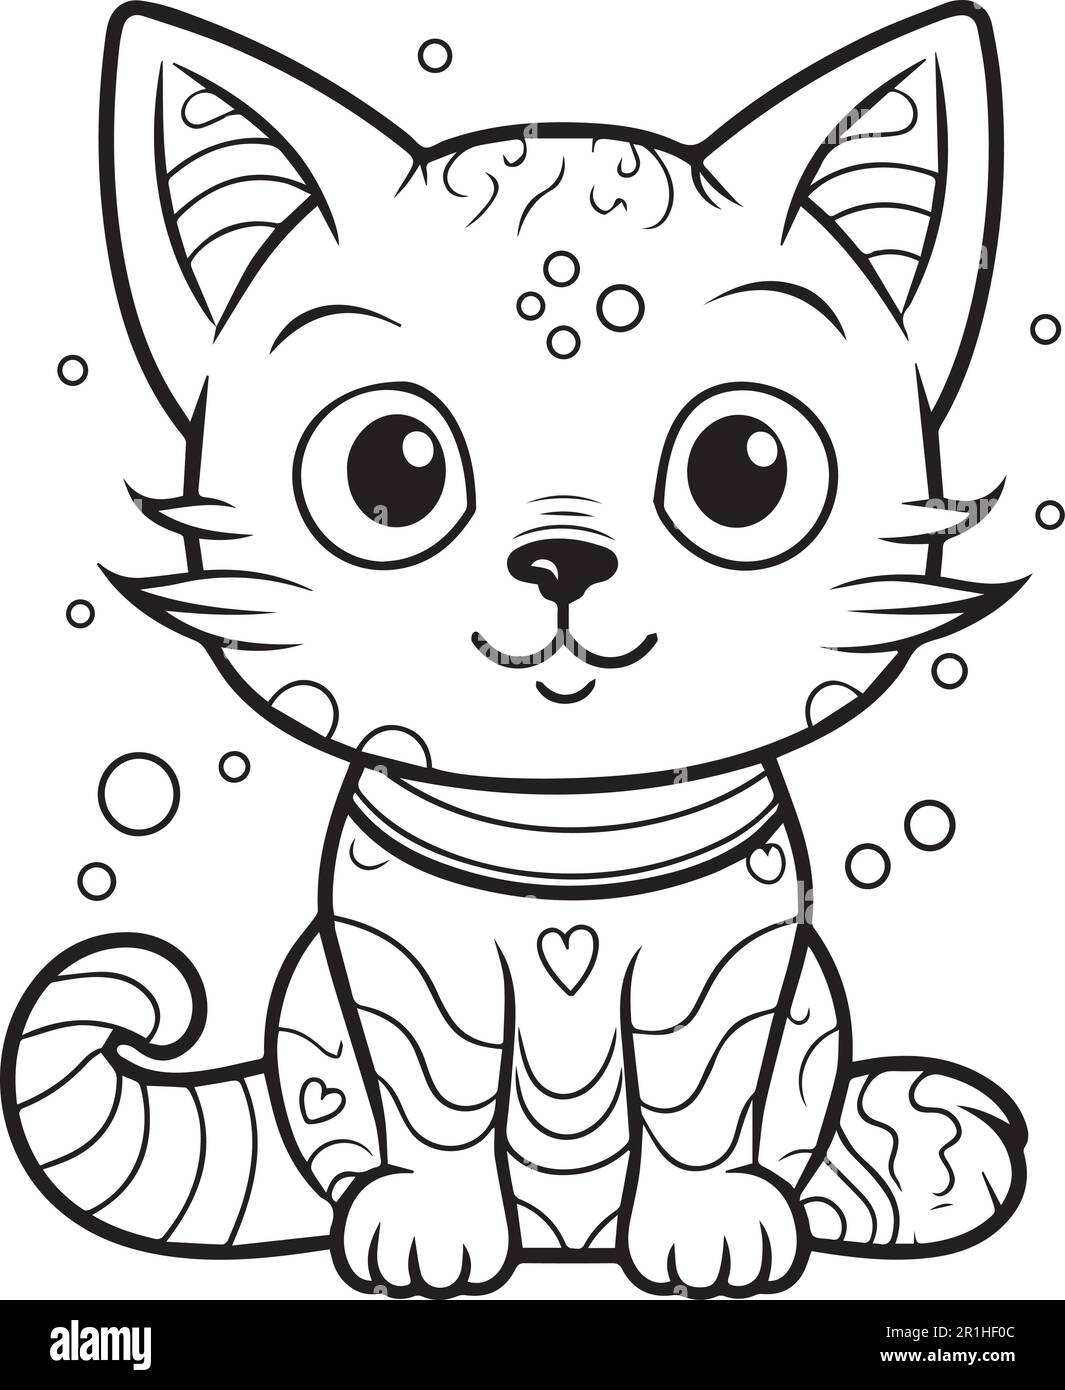 https://c8.alamy.com/comp/2R1HF0C/a-cute-line-art-cat-coloring-book-for-kids-coloring-page-for-doodlers-2R1HF0C.jpg